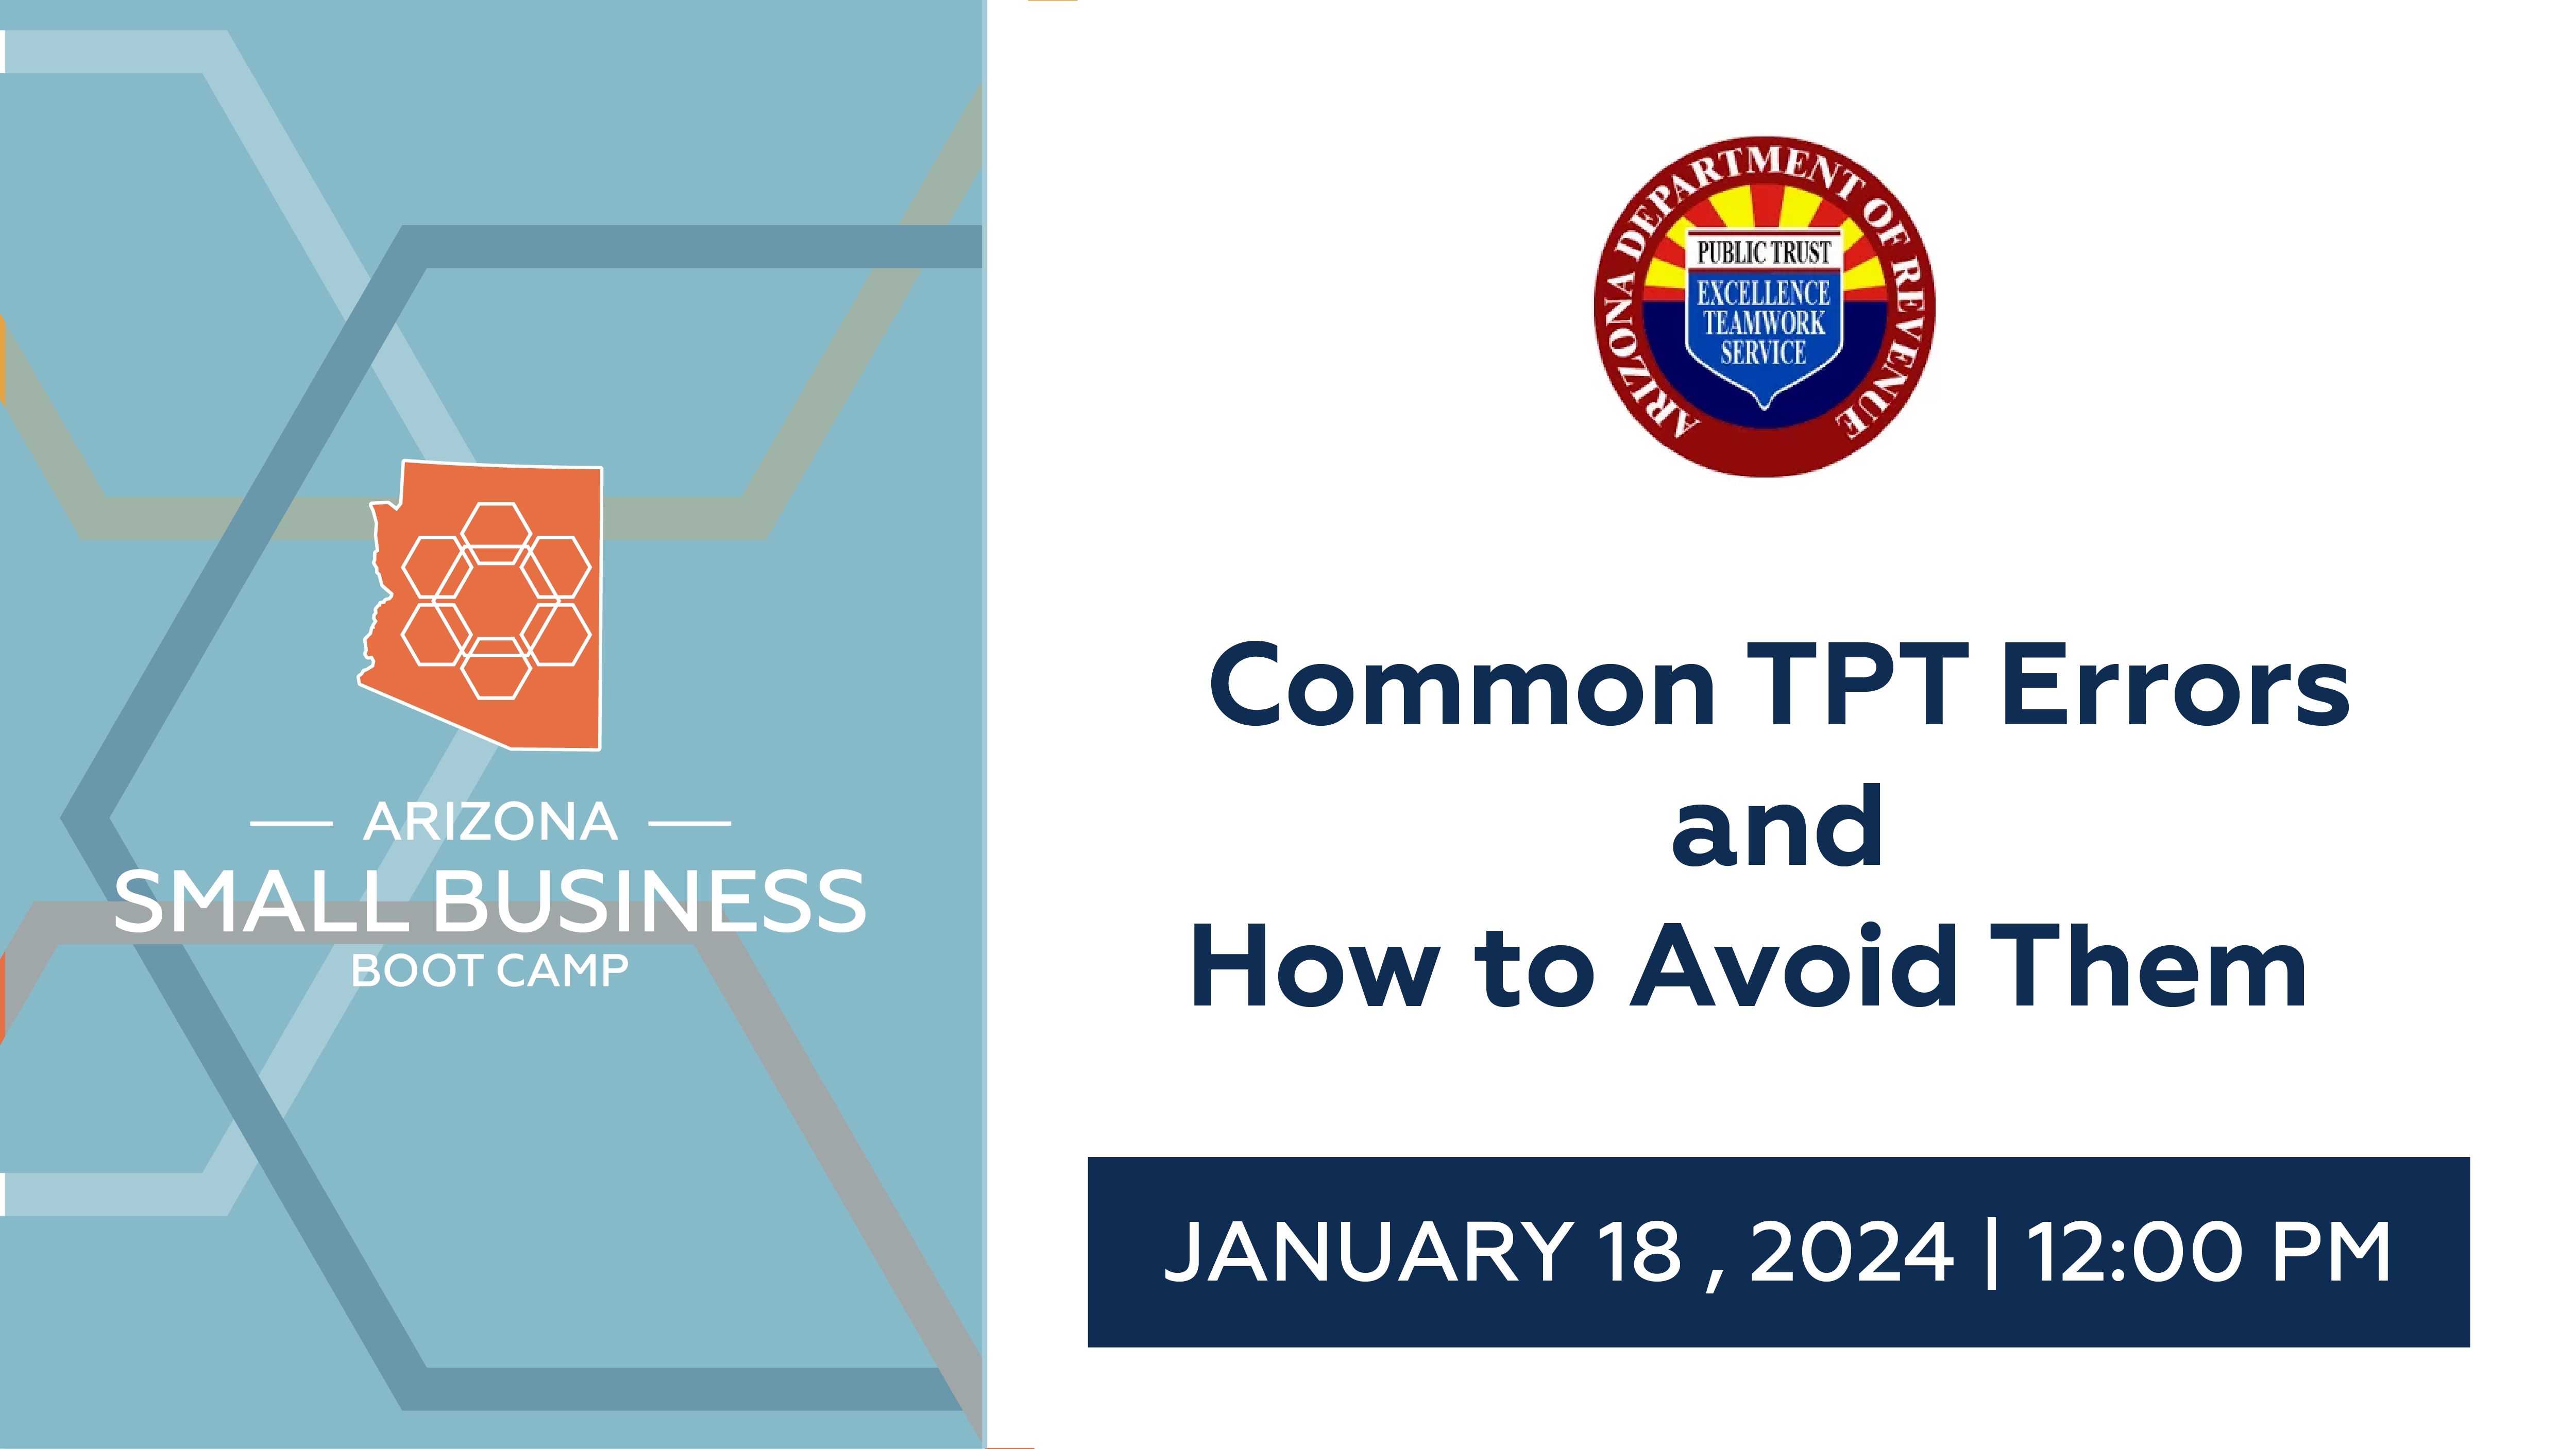 Workshop: Common TPT Errors and How to Avoid Them